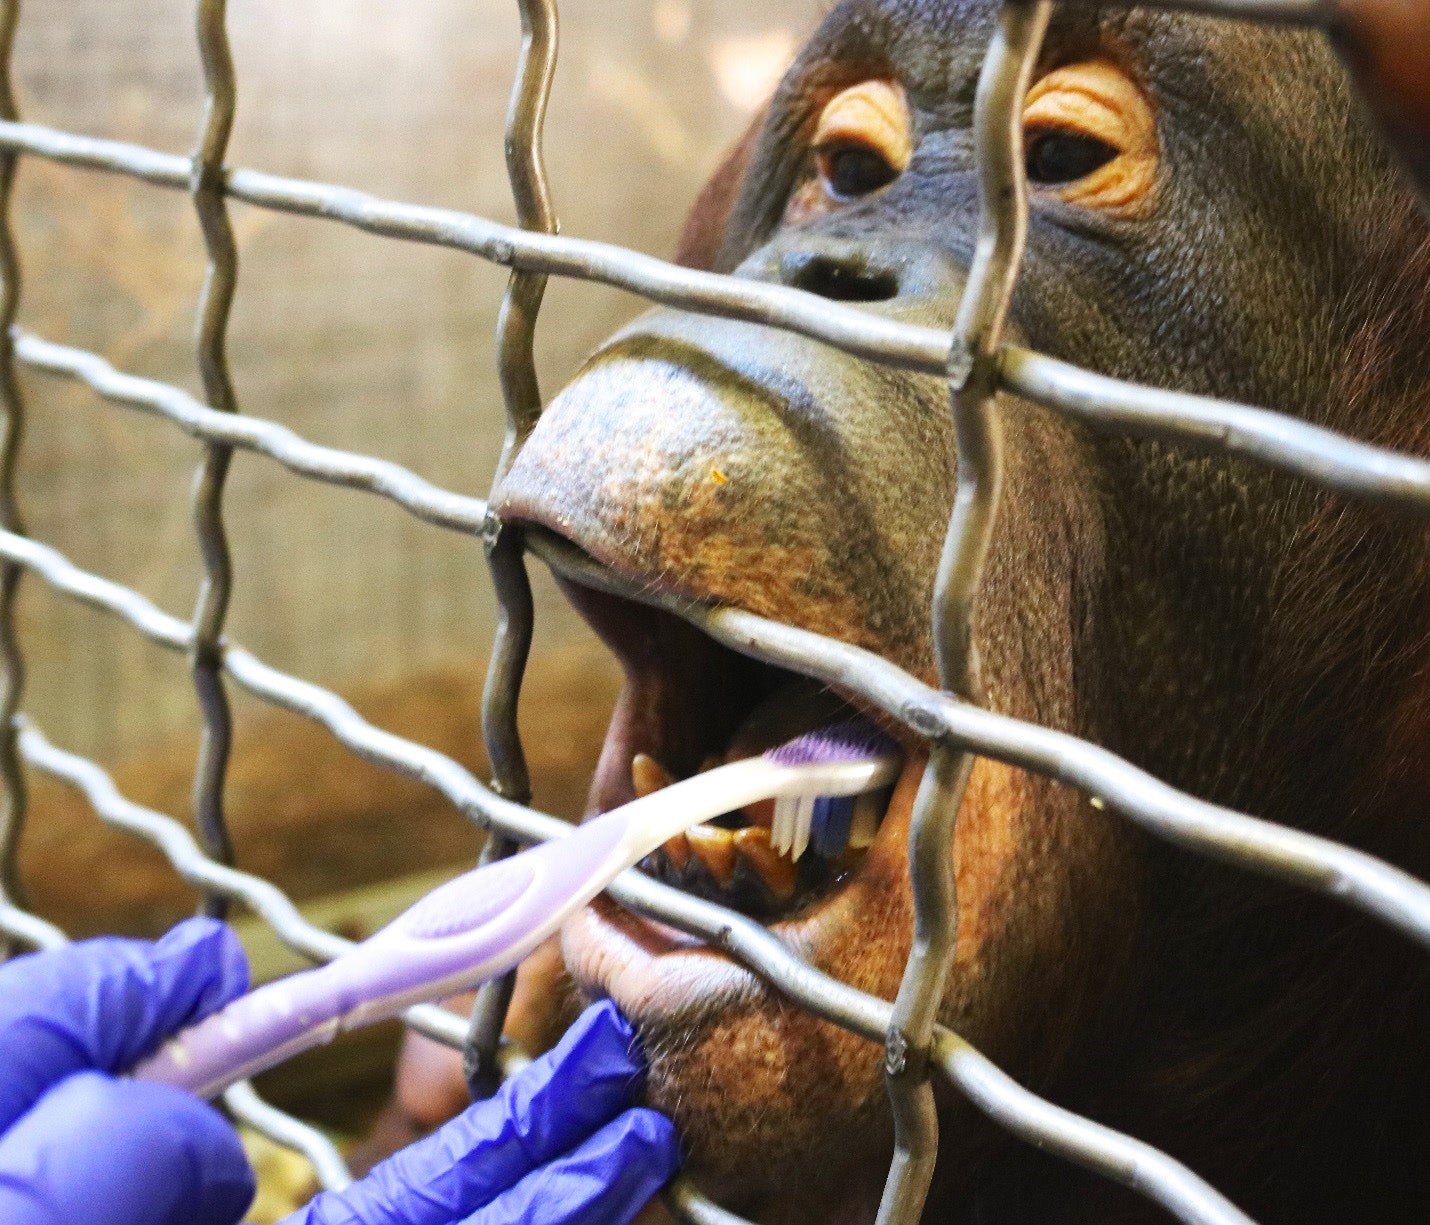 Training husbandry behaviors also allows keepers to provide safe, effective and stress-free medical care whenever possible. Bornean orangutan Batang voluntarily participates in having her teeth brushed. This allows primate keepers to quickly detect any dental issues that arise. 